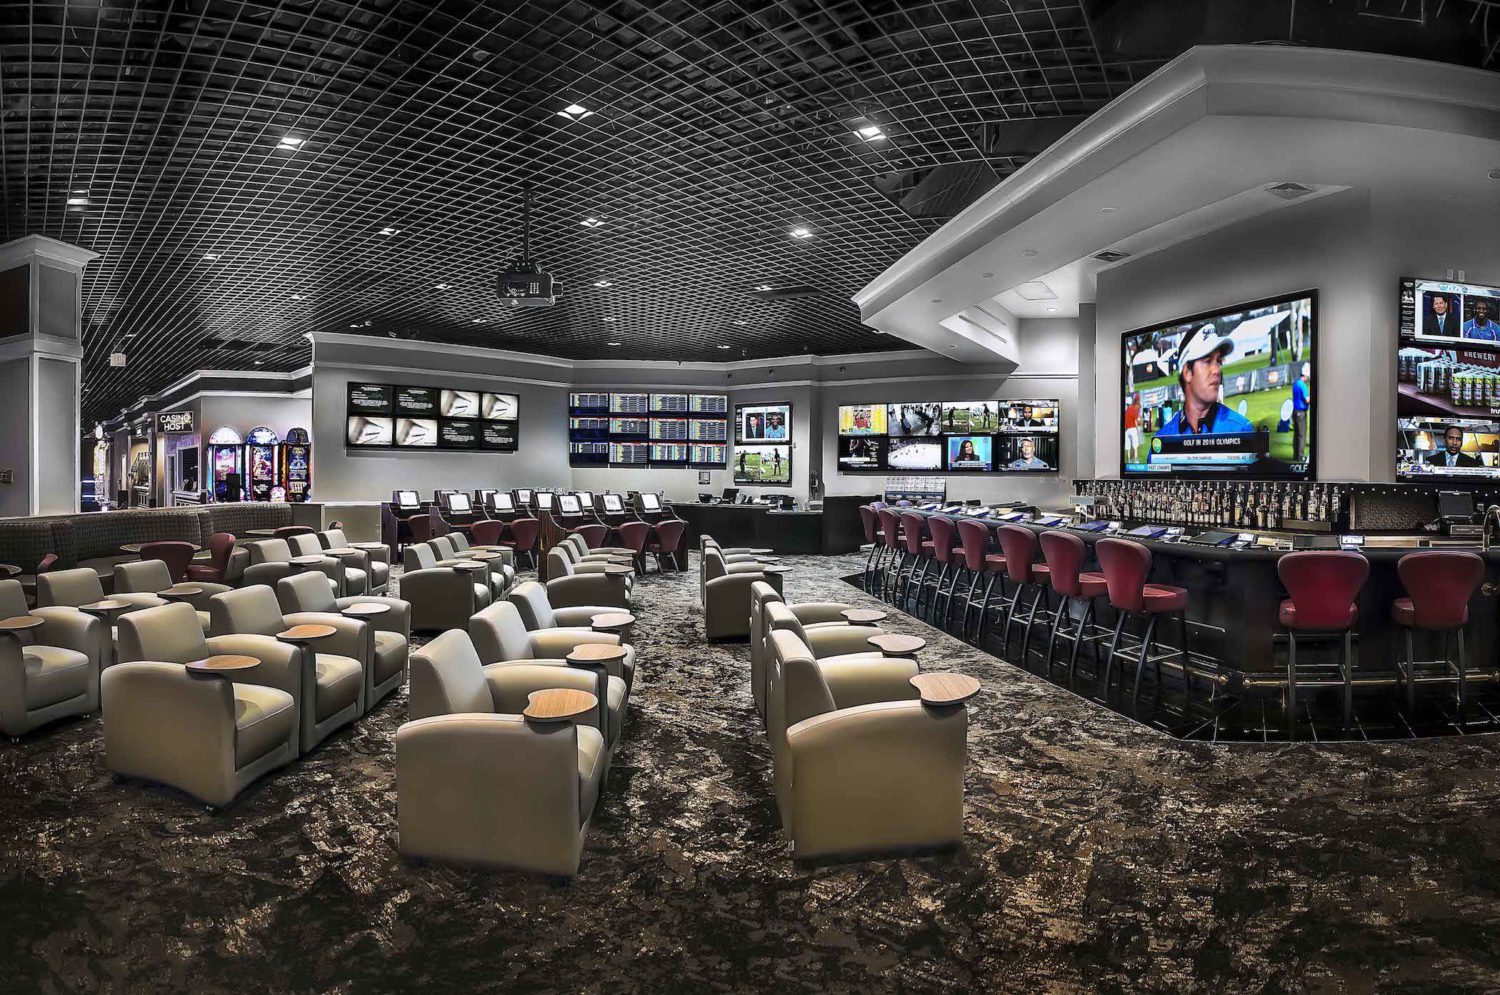 The Pahrump Nugget Hotel & Casino, owned by Golden Casino Group (GCG), a division of Golden Entertainment, Inc., opened a new, state-of-the-art sports book.